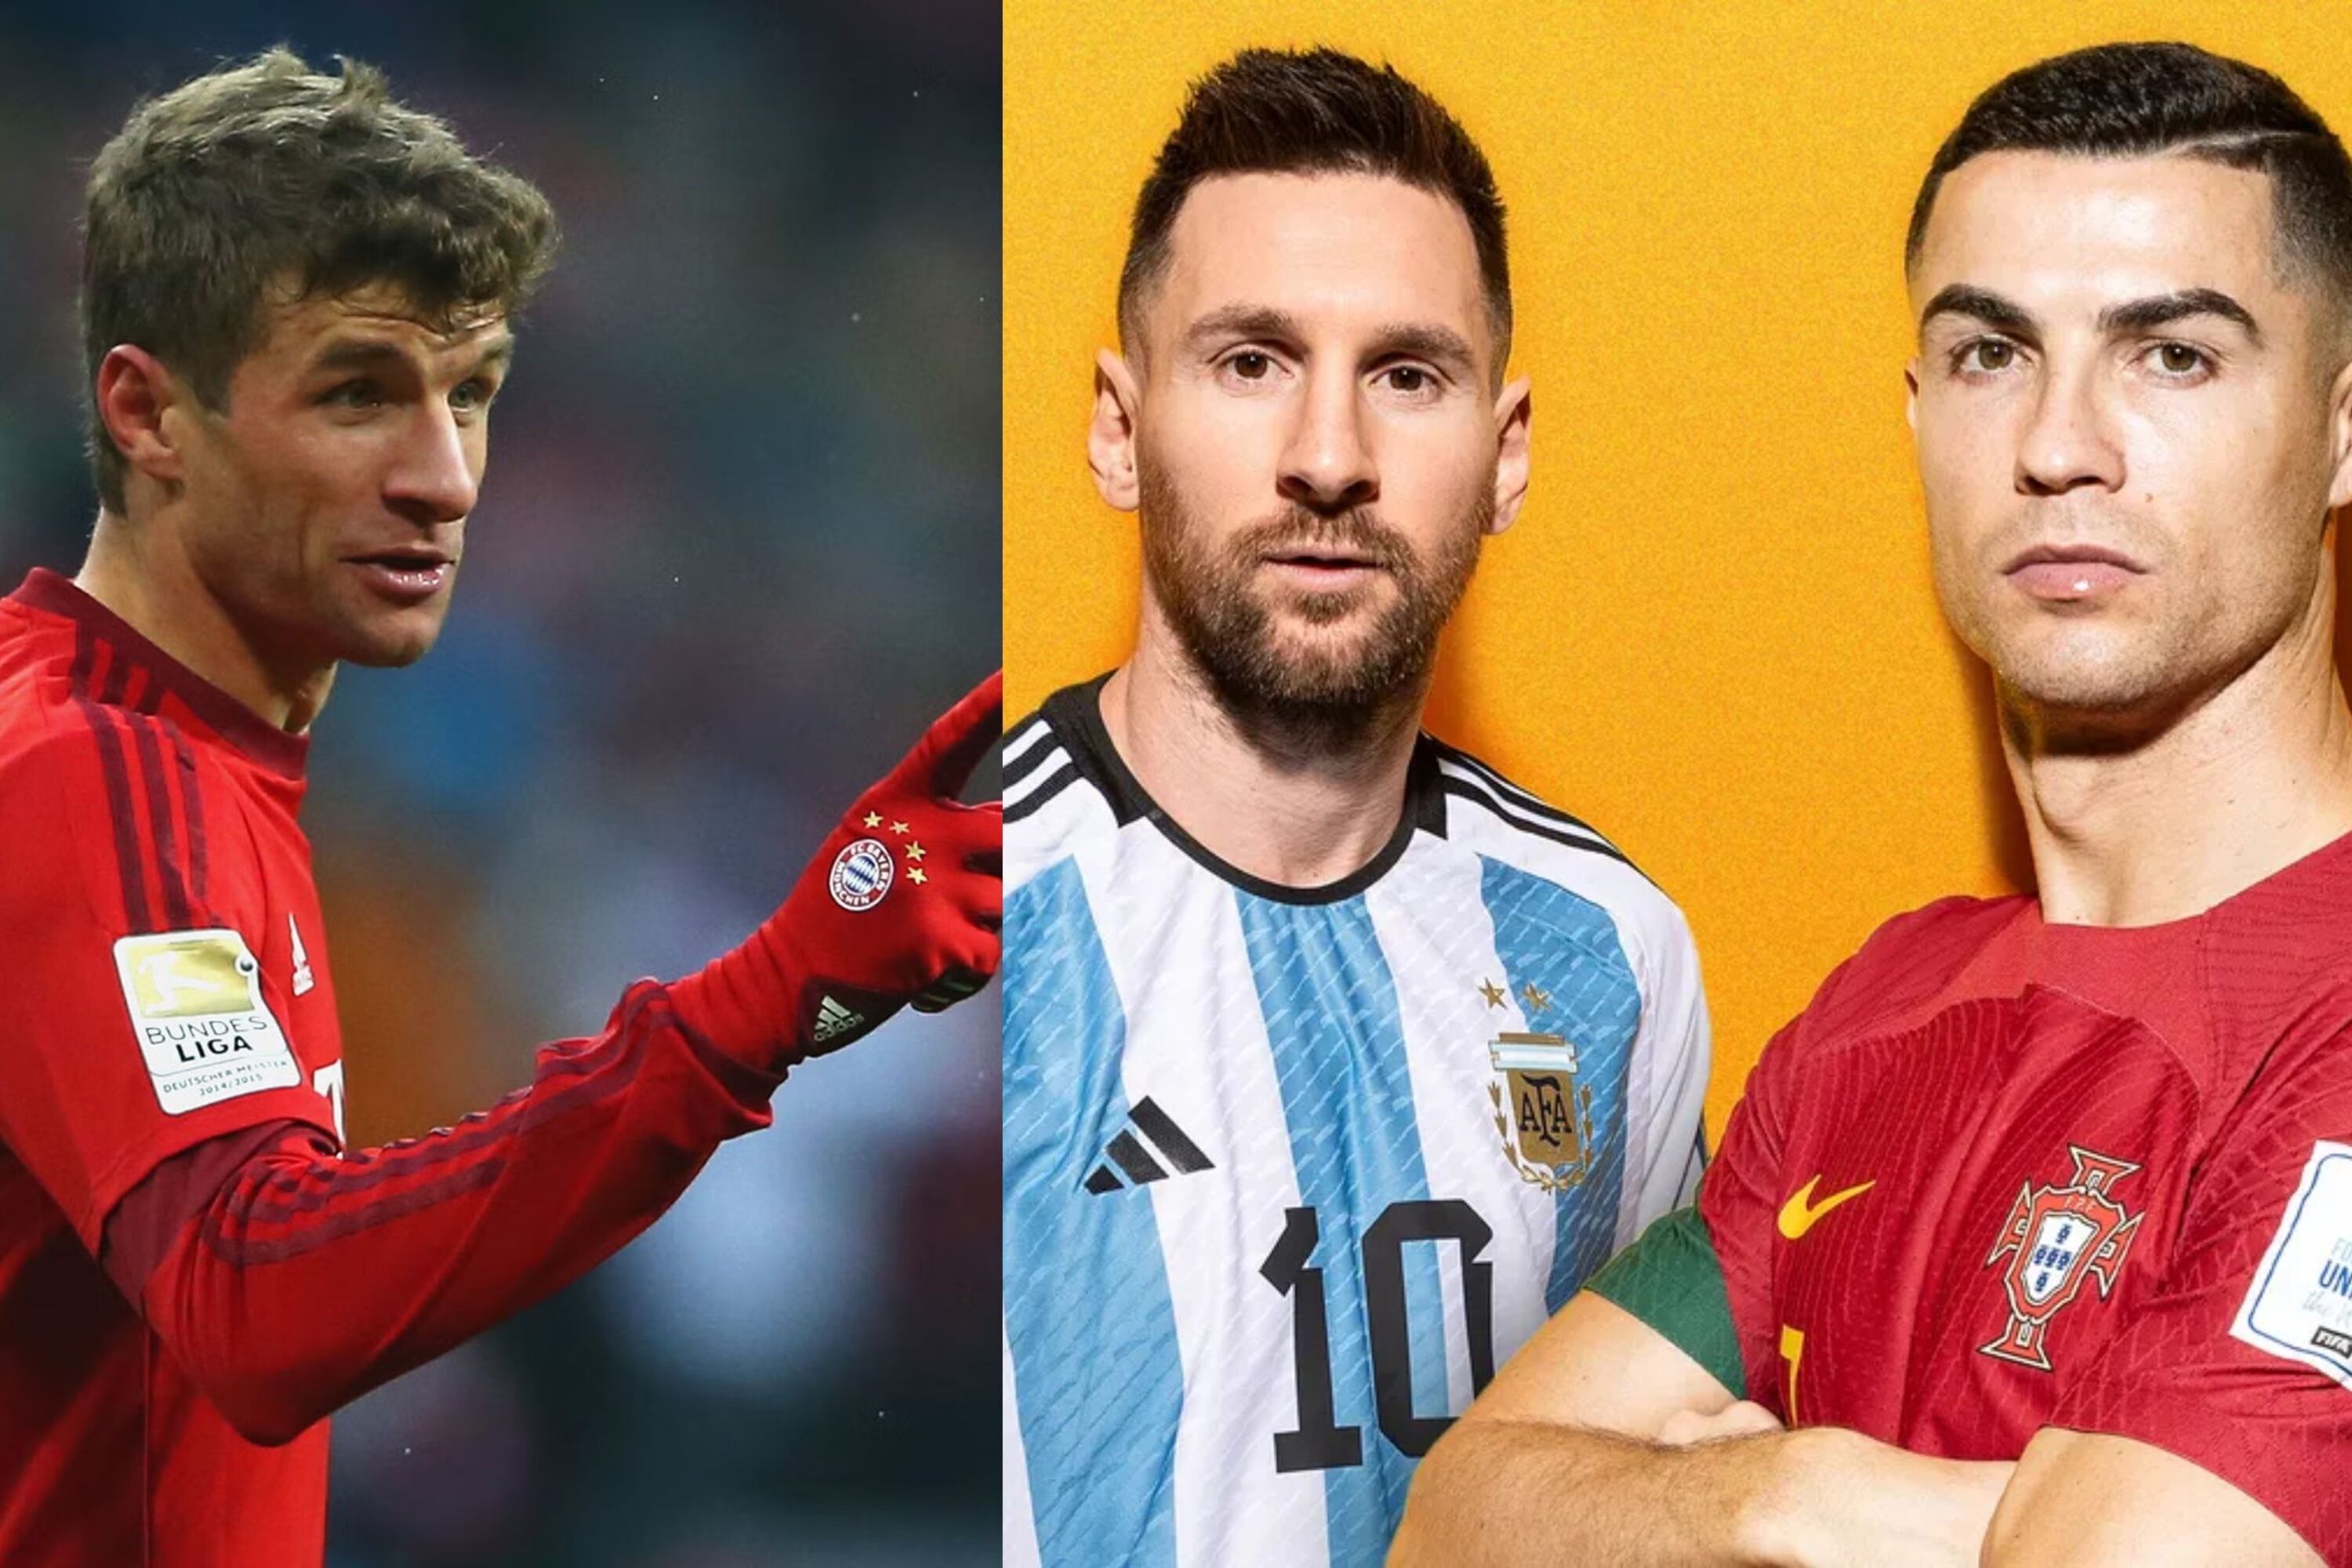 Thomas Müller confesses who is the best in the world between Messi and Cristiano, this is what he said